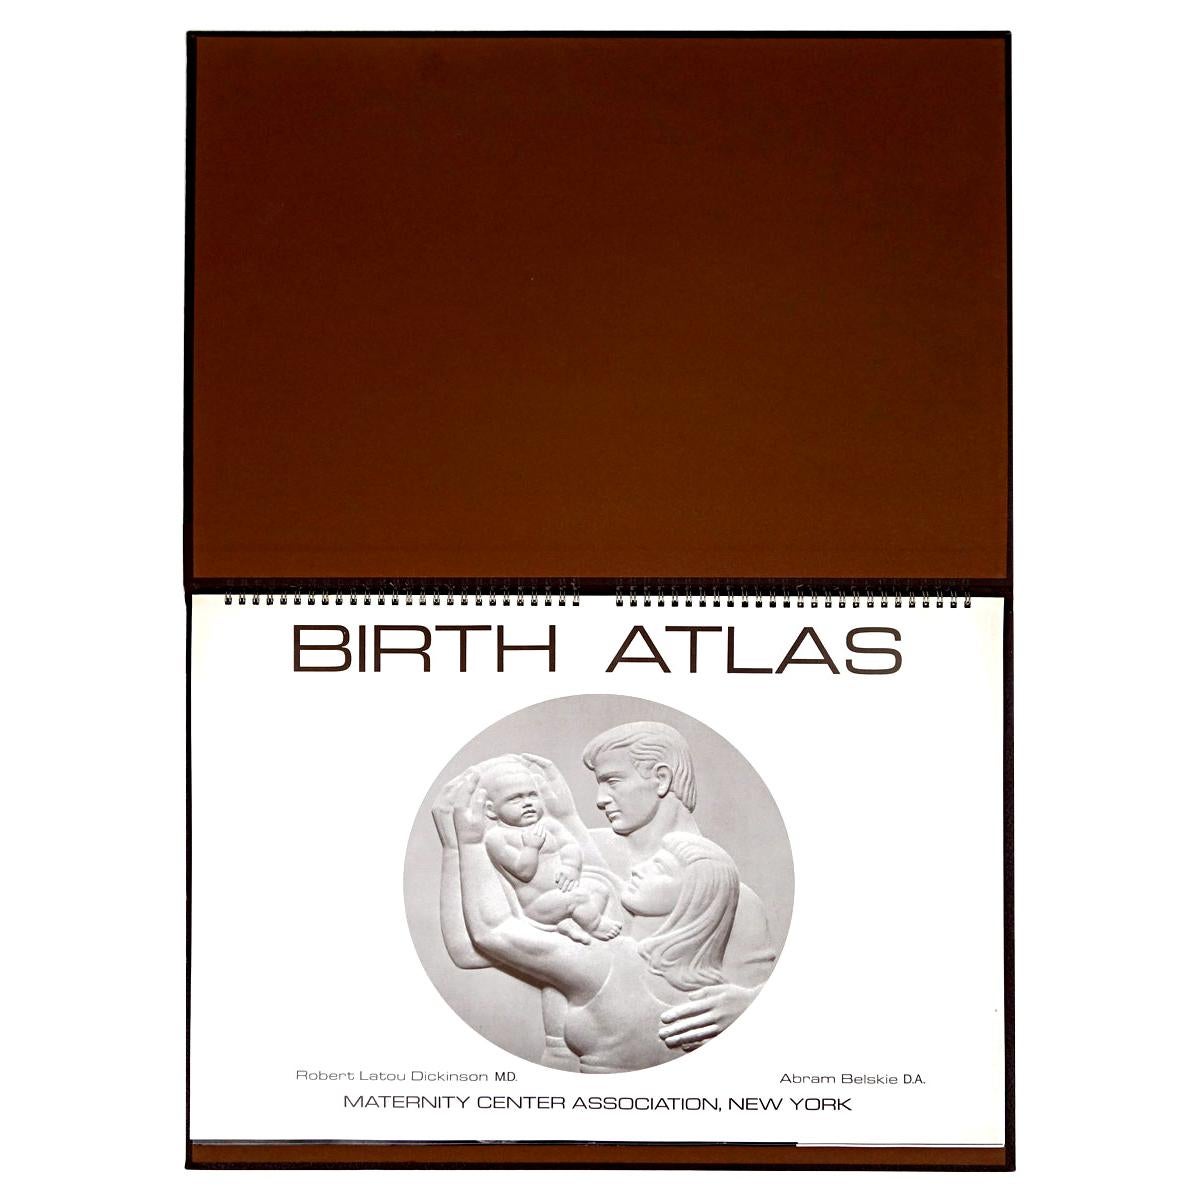 Birth Atlas by the Maternity Center Association in New York